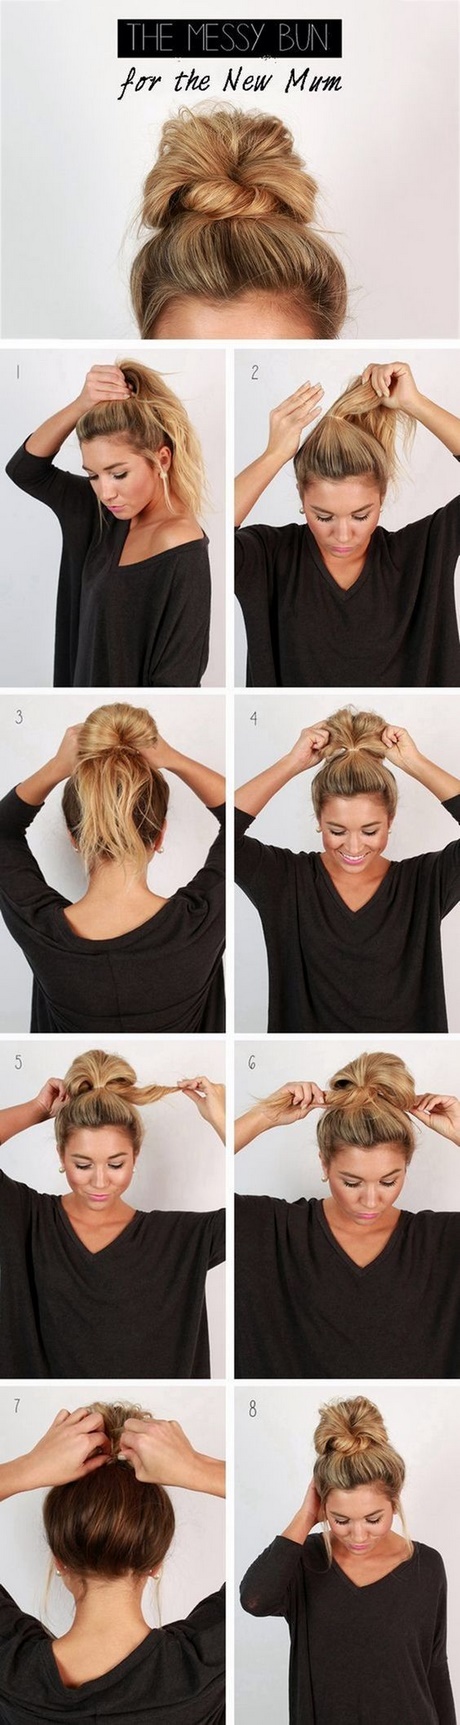 quick-and-simple-hairstyles-76_2 Quick and simple hairstyles